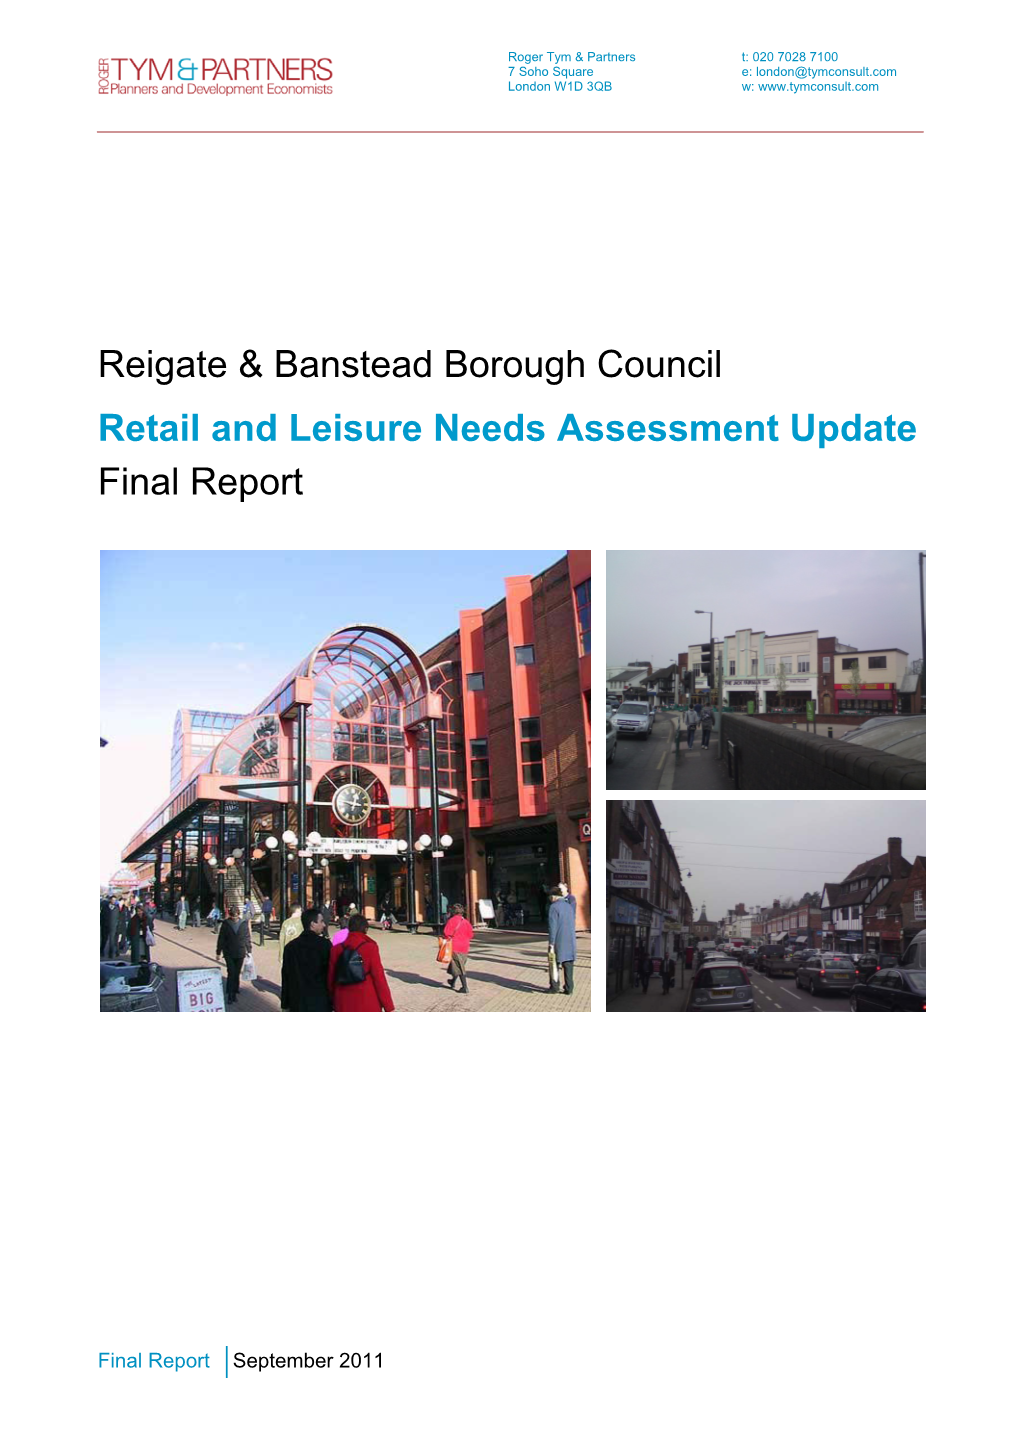 Reigate & Banstead Borough Council Retail and Leisure Needs